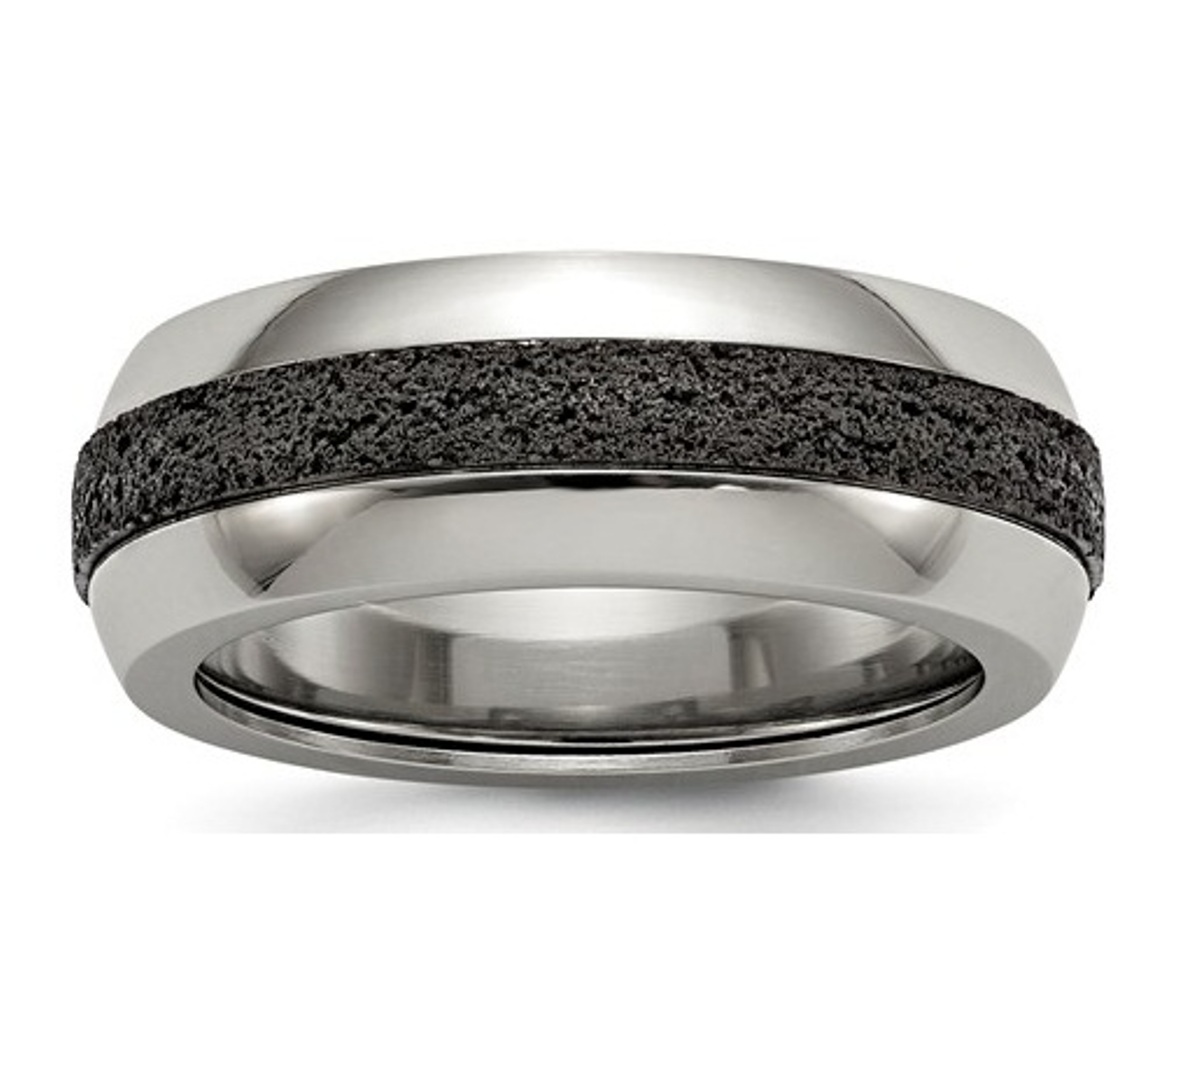  Stainless Steel With Black Crete Inlay Stepped 8mm Band